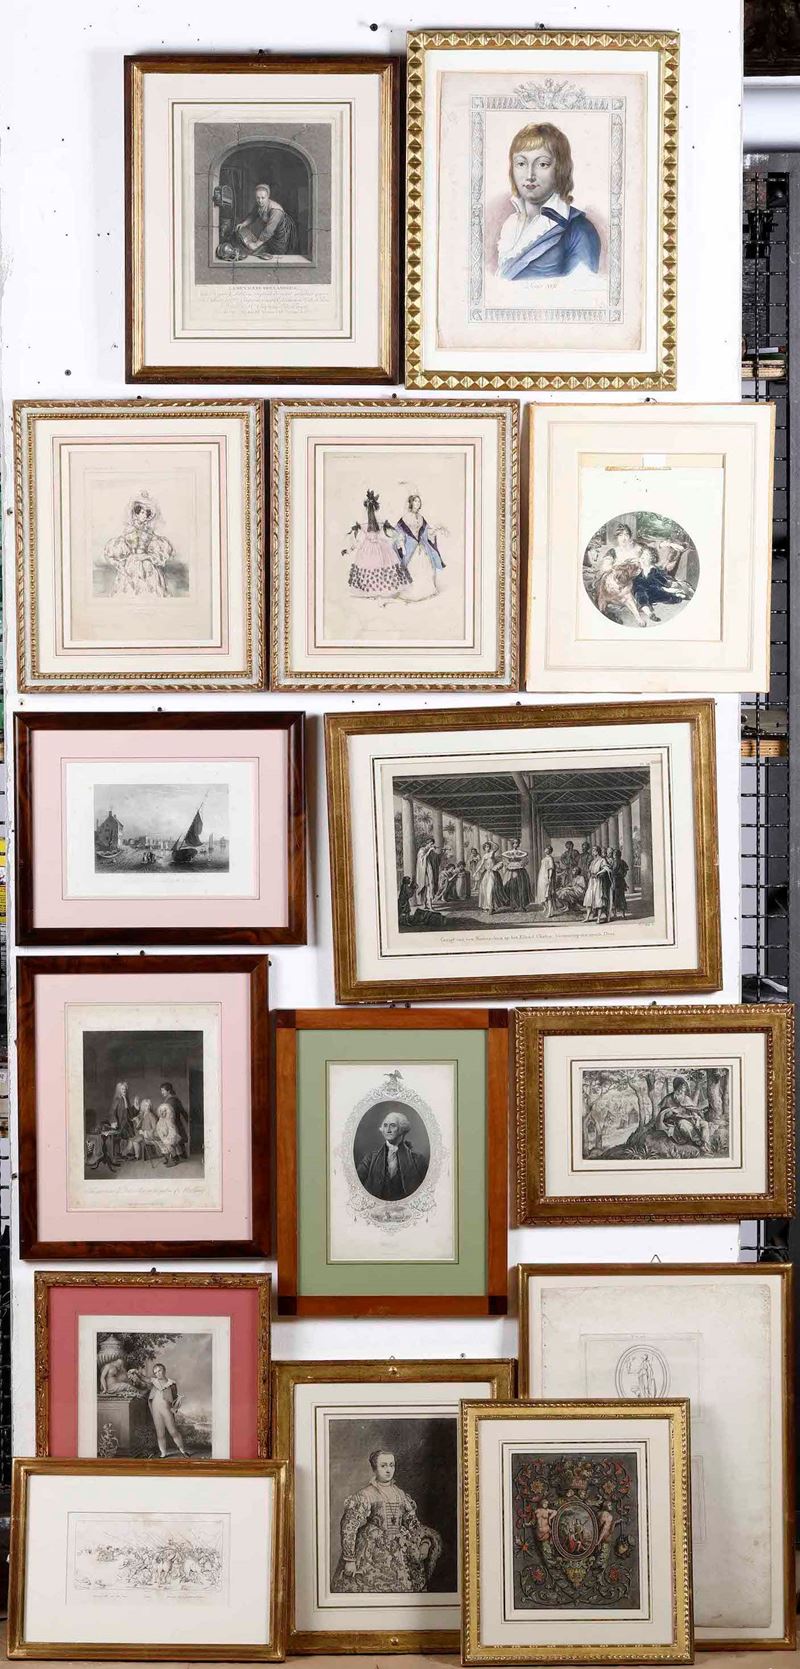 Lotto misto di 15 stampe  - Auction Antiques and paintings - Cambi Casa d'Aste